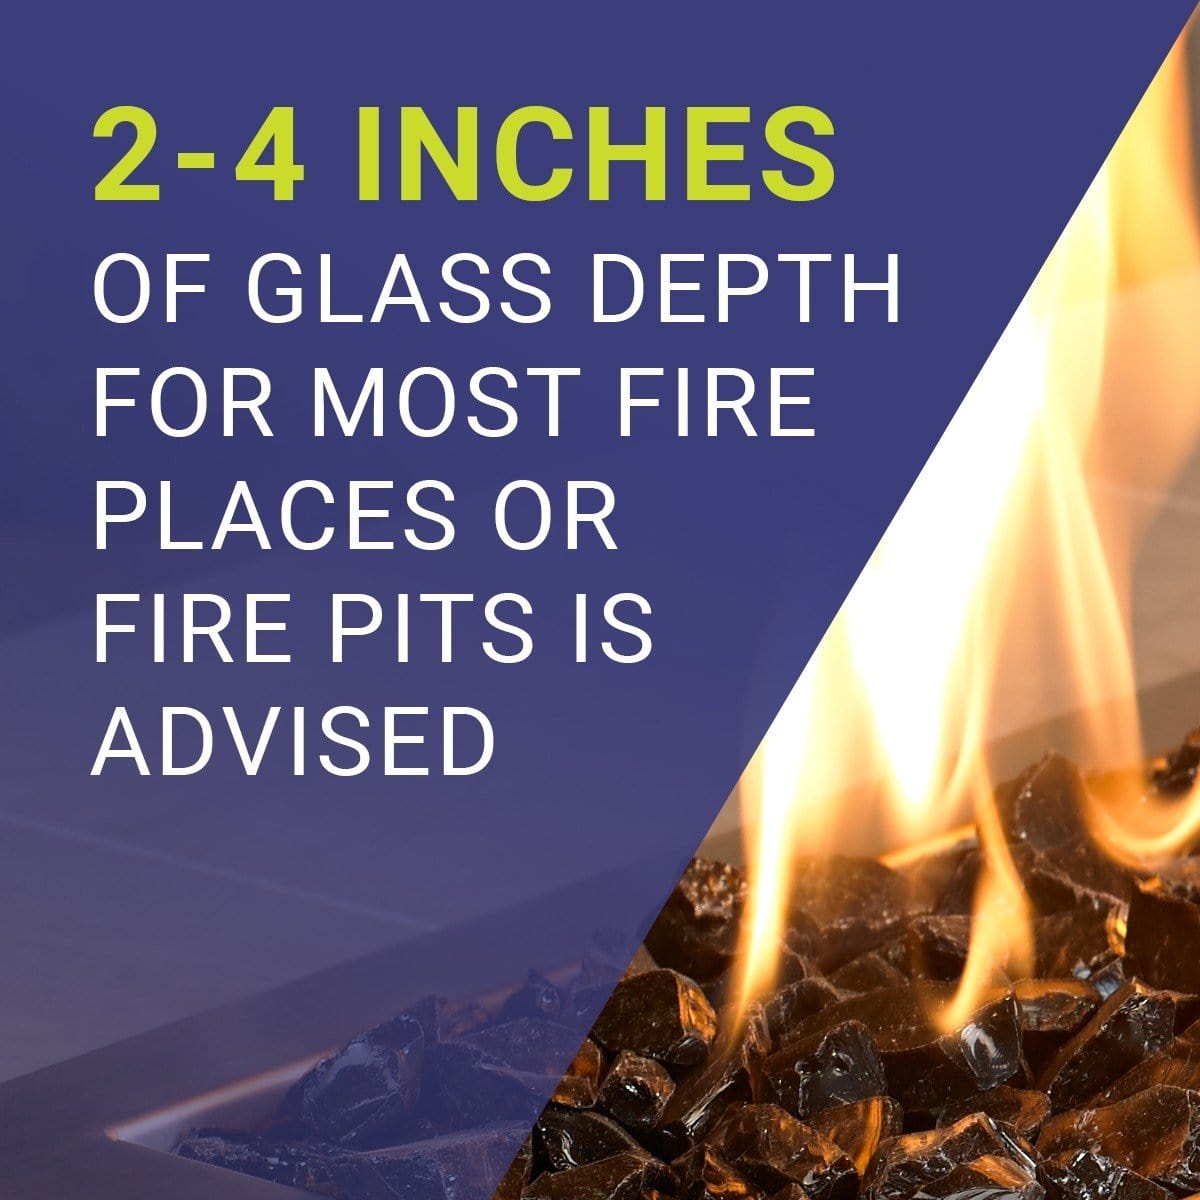 American Fire Glass AFF-EVGRRF-10 1/4-Inch Premium Fire Glass 10-Pounds, Evergreen Reflective